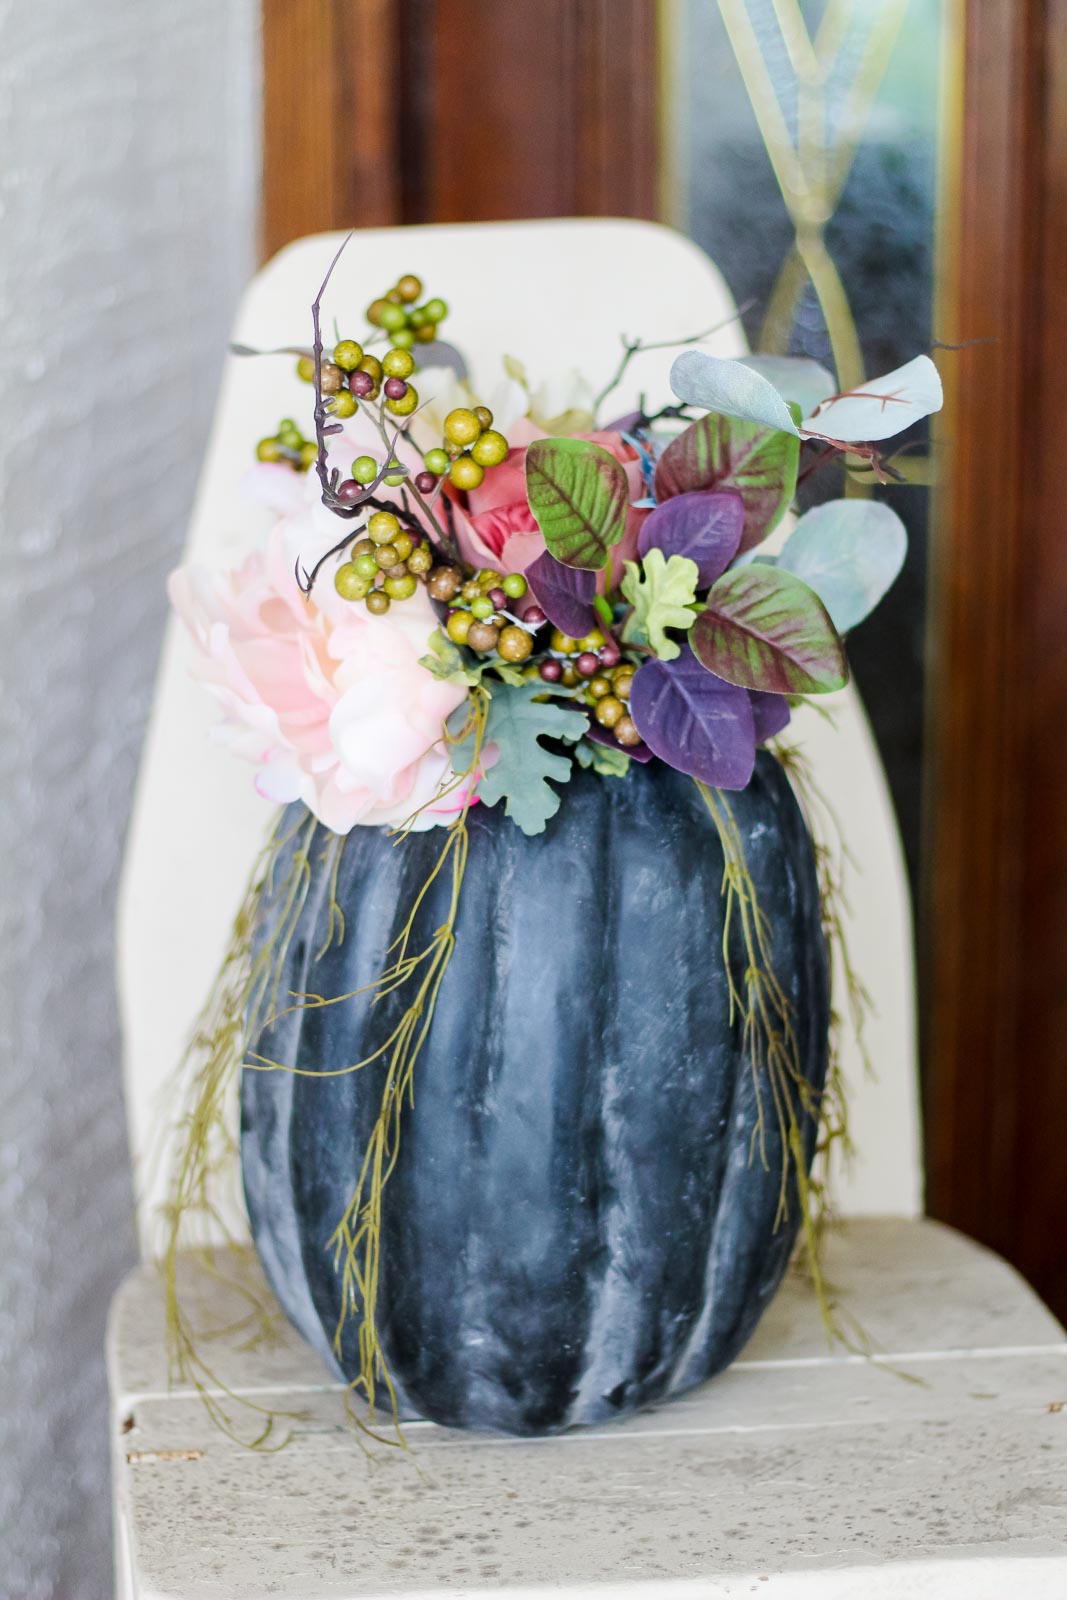 Fall Porch Decor & Indoor Home Goods To Cozy Up Your Space This Season